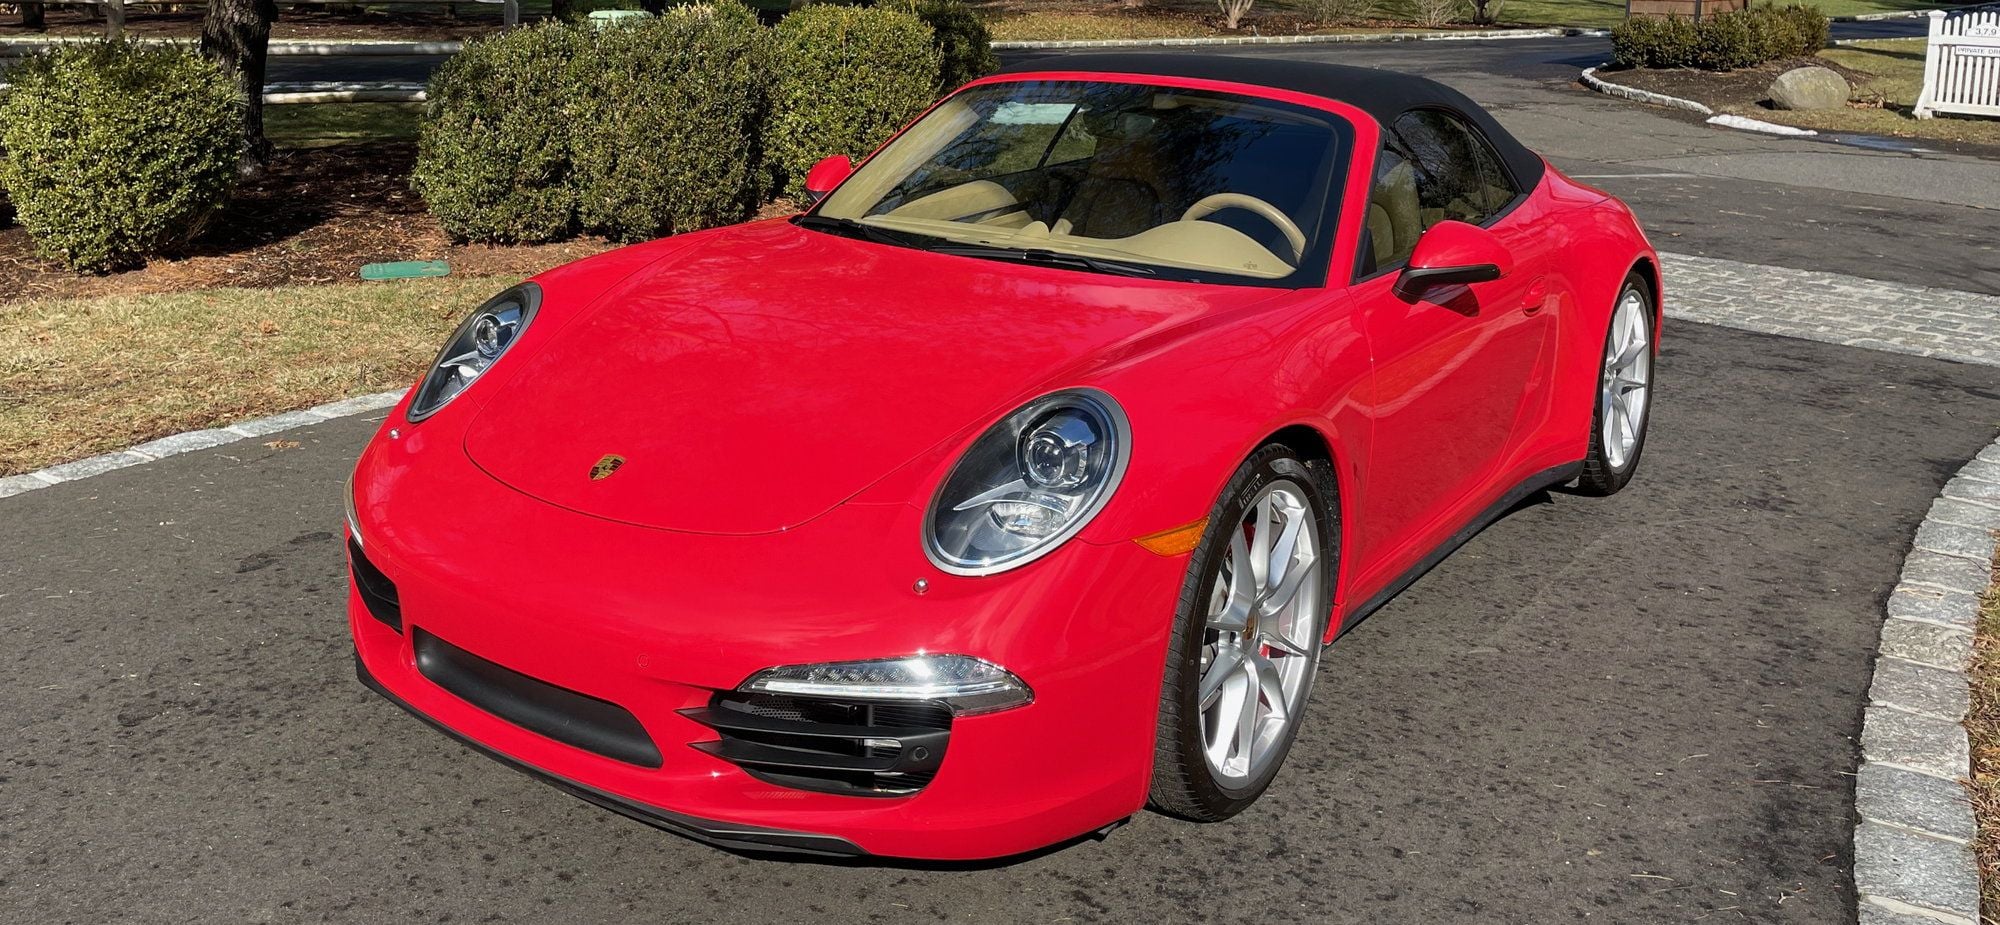 2013 Porsche 911 - Only 1,959 Miles on 2013 Porsche 911 Carrera 4S Cabriolet in mint condition!!! - Used - VIN WPOCB2A90DS155531 - 1,959 Miles - 6 cyl - AWD - Automatic - Convertible - Red - Greenwich, CT 06830, United States